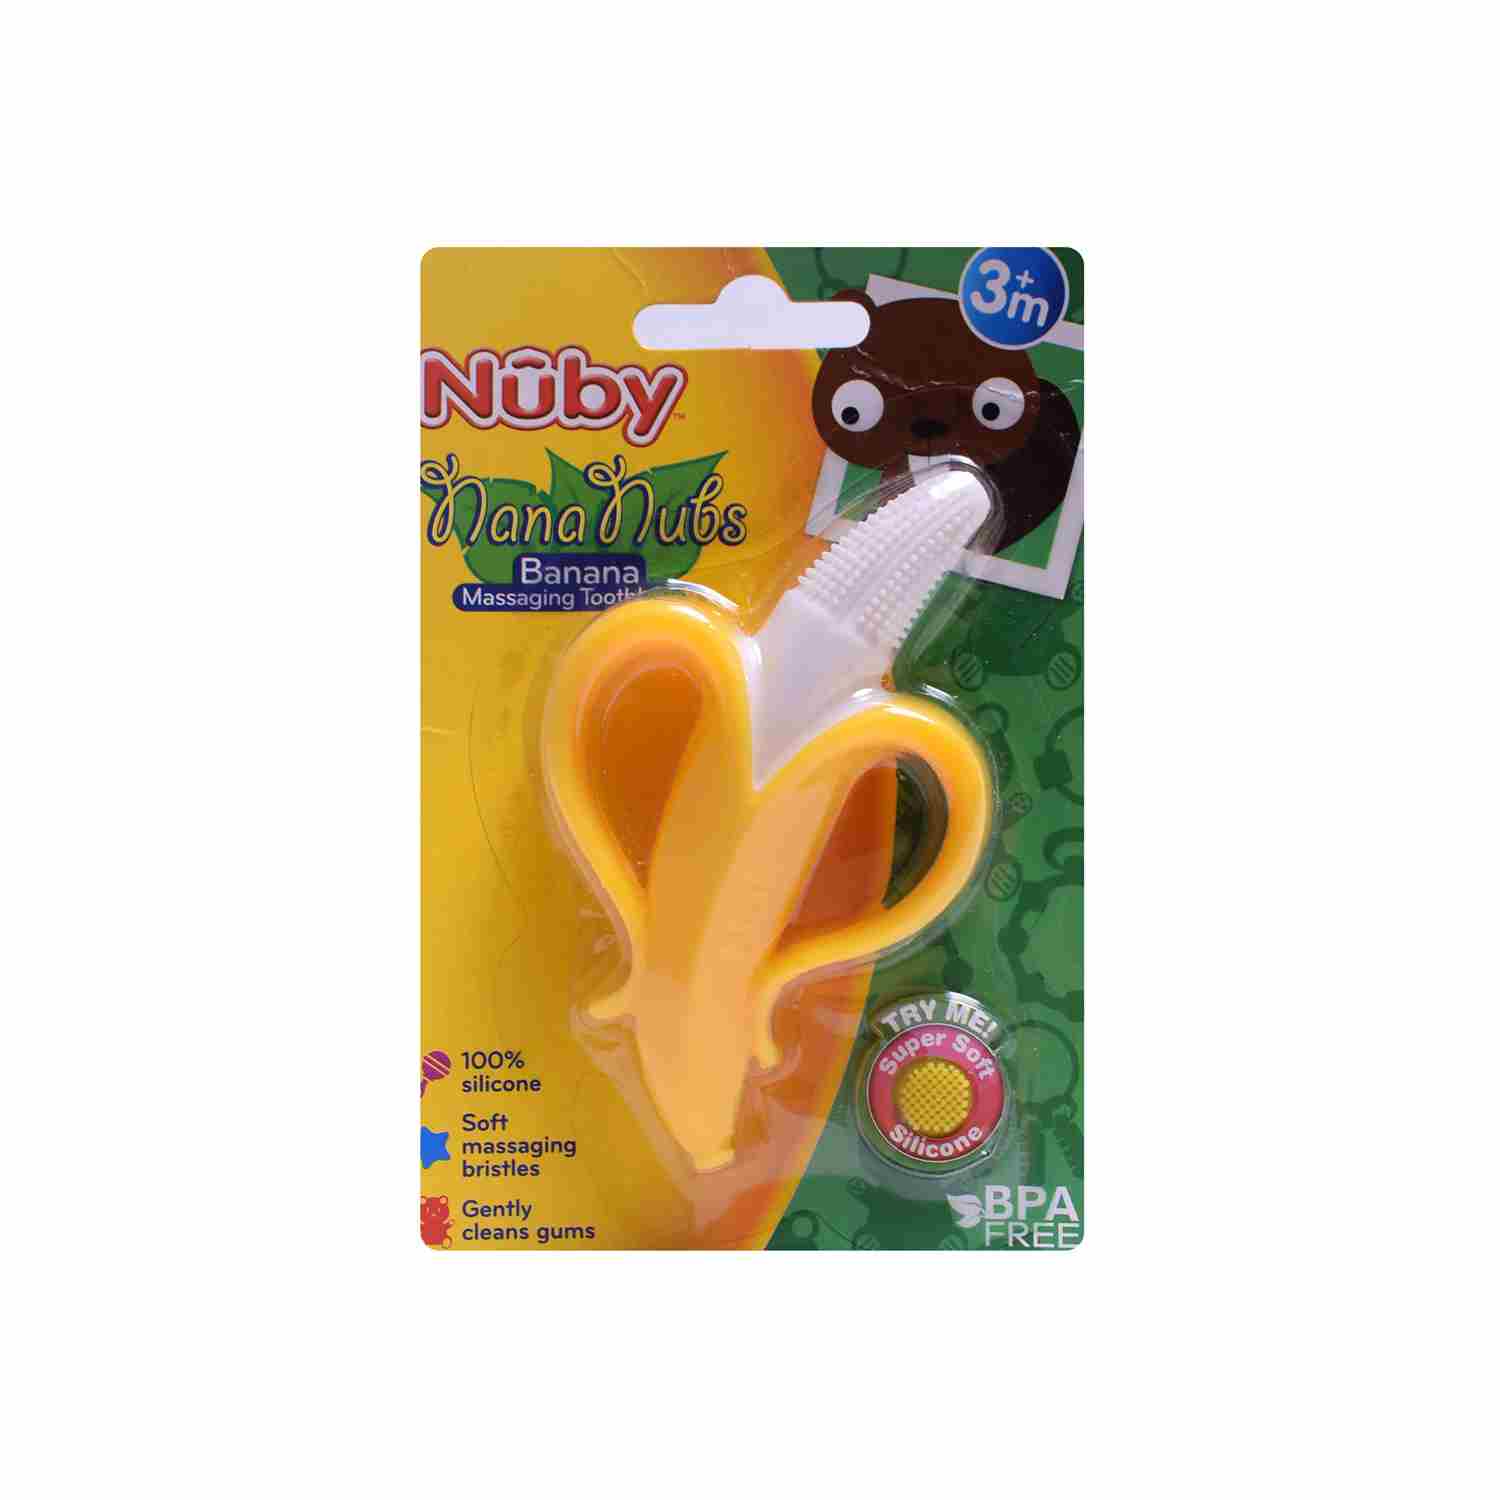 NUBY Soft silicone banana shaped massaging toothbrush for babies - Yellow, 3+m